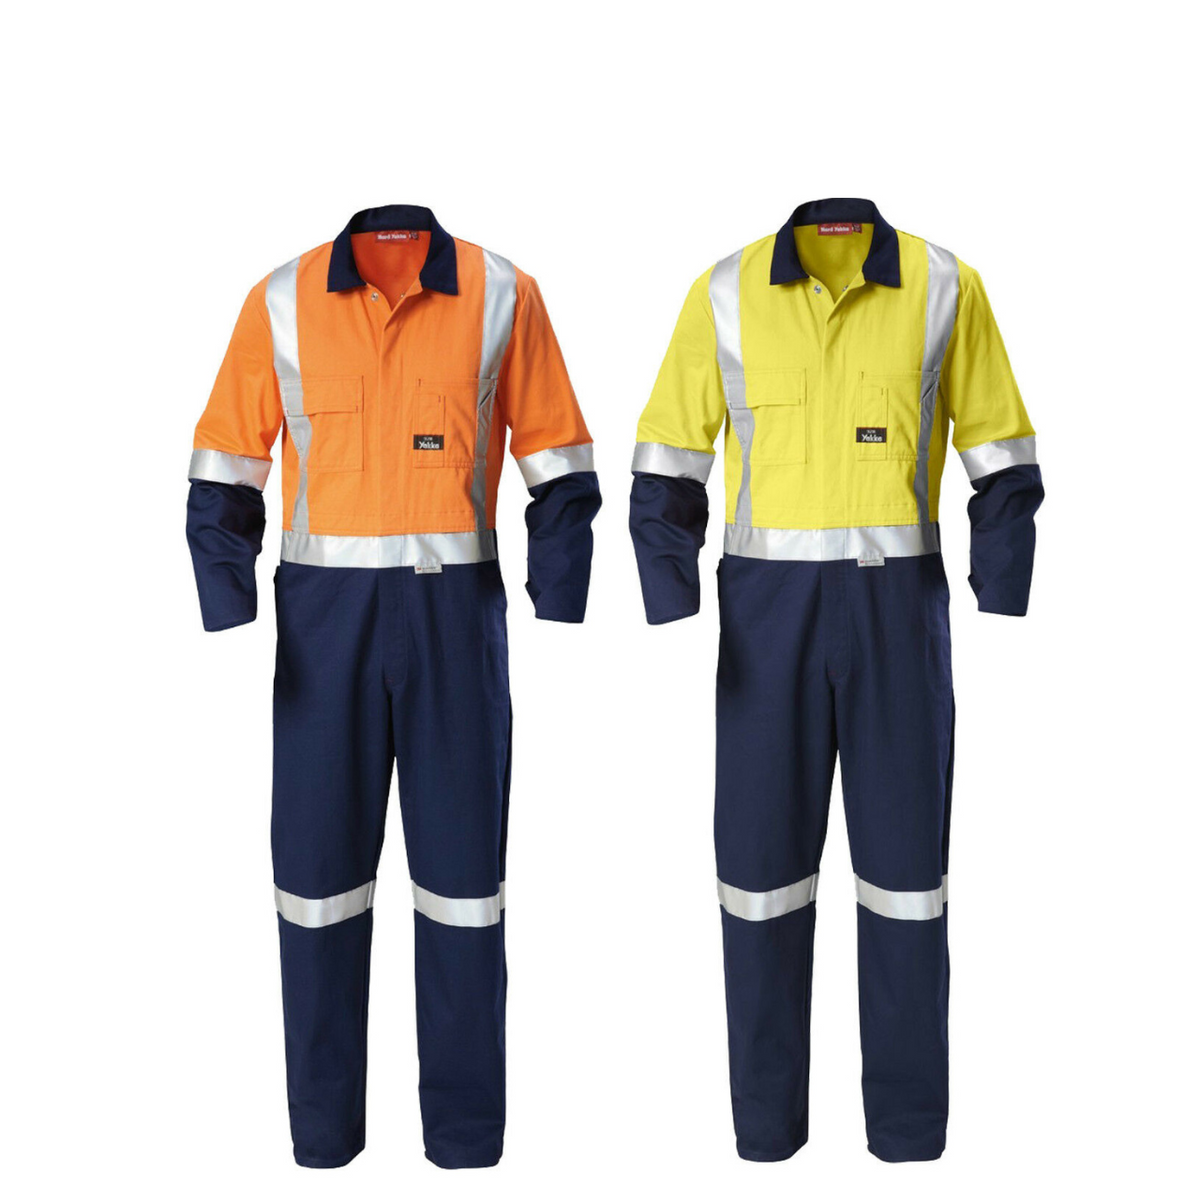 Mens Hard Yakka Hi-Vis Taped Cotton Safety Coverall Overalls Workwear Y00262-Collins Clothing Co